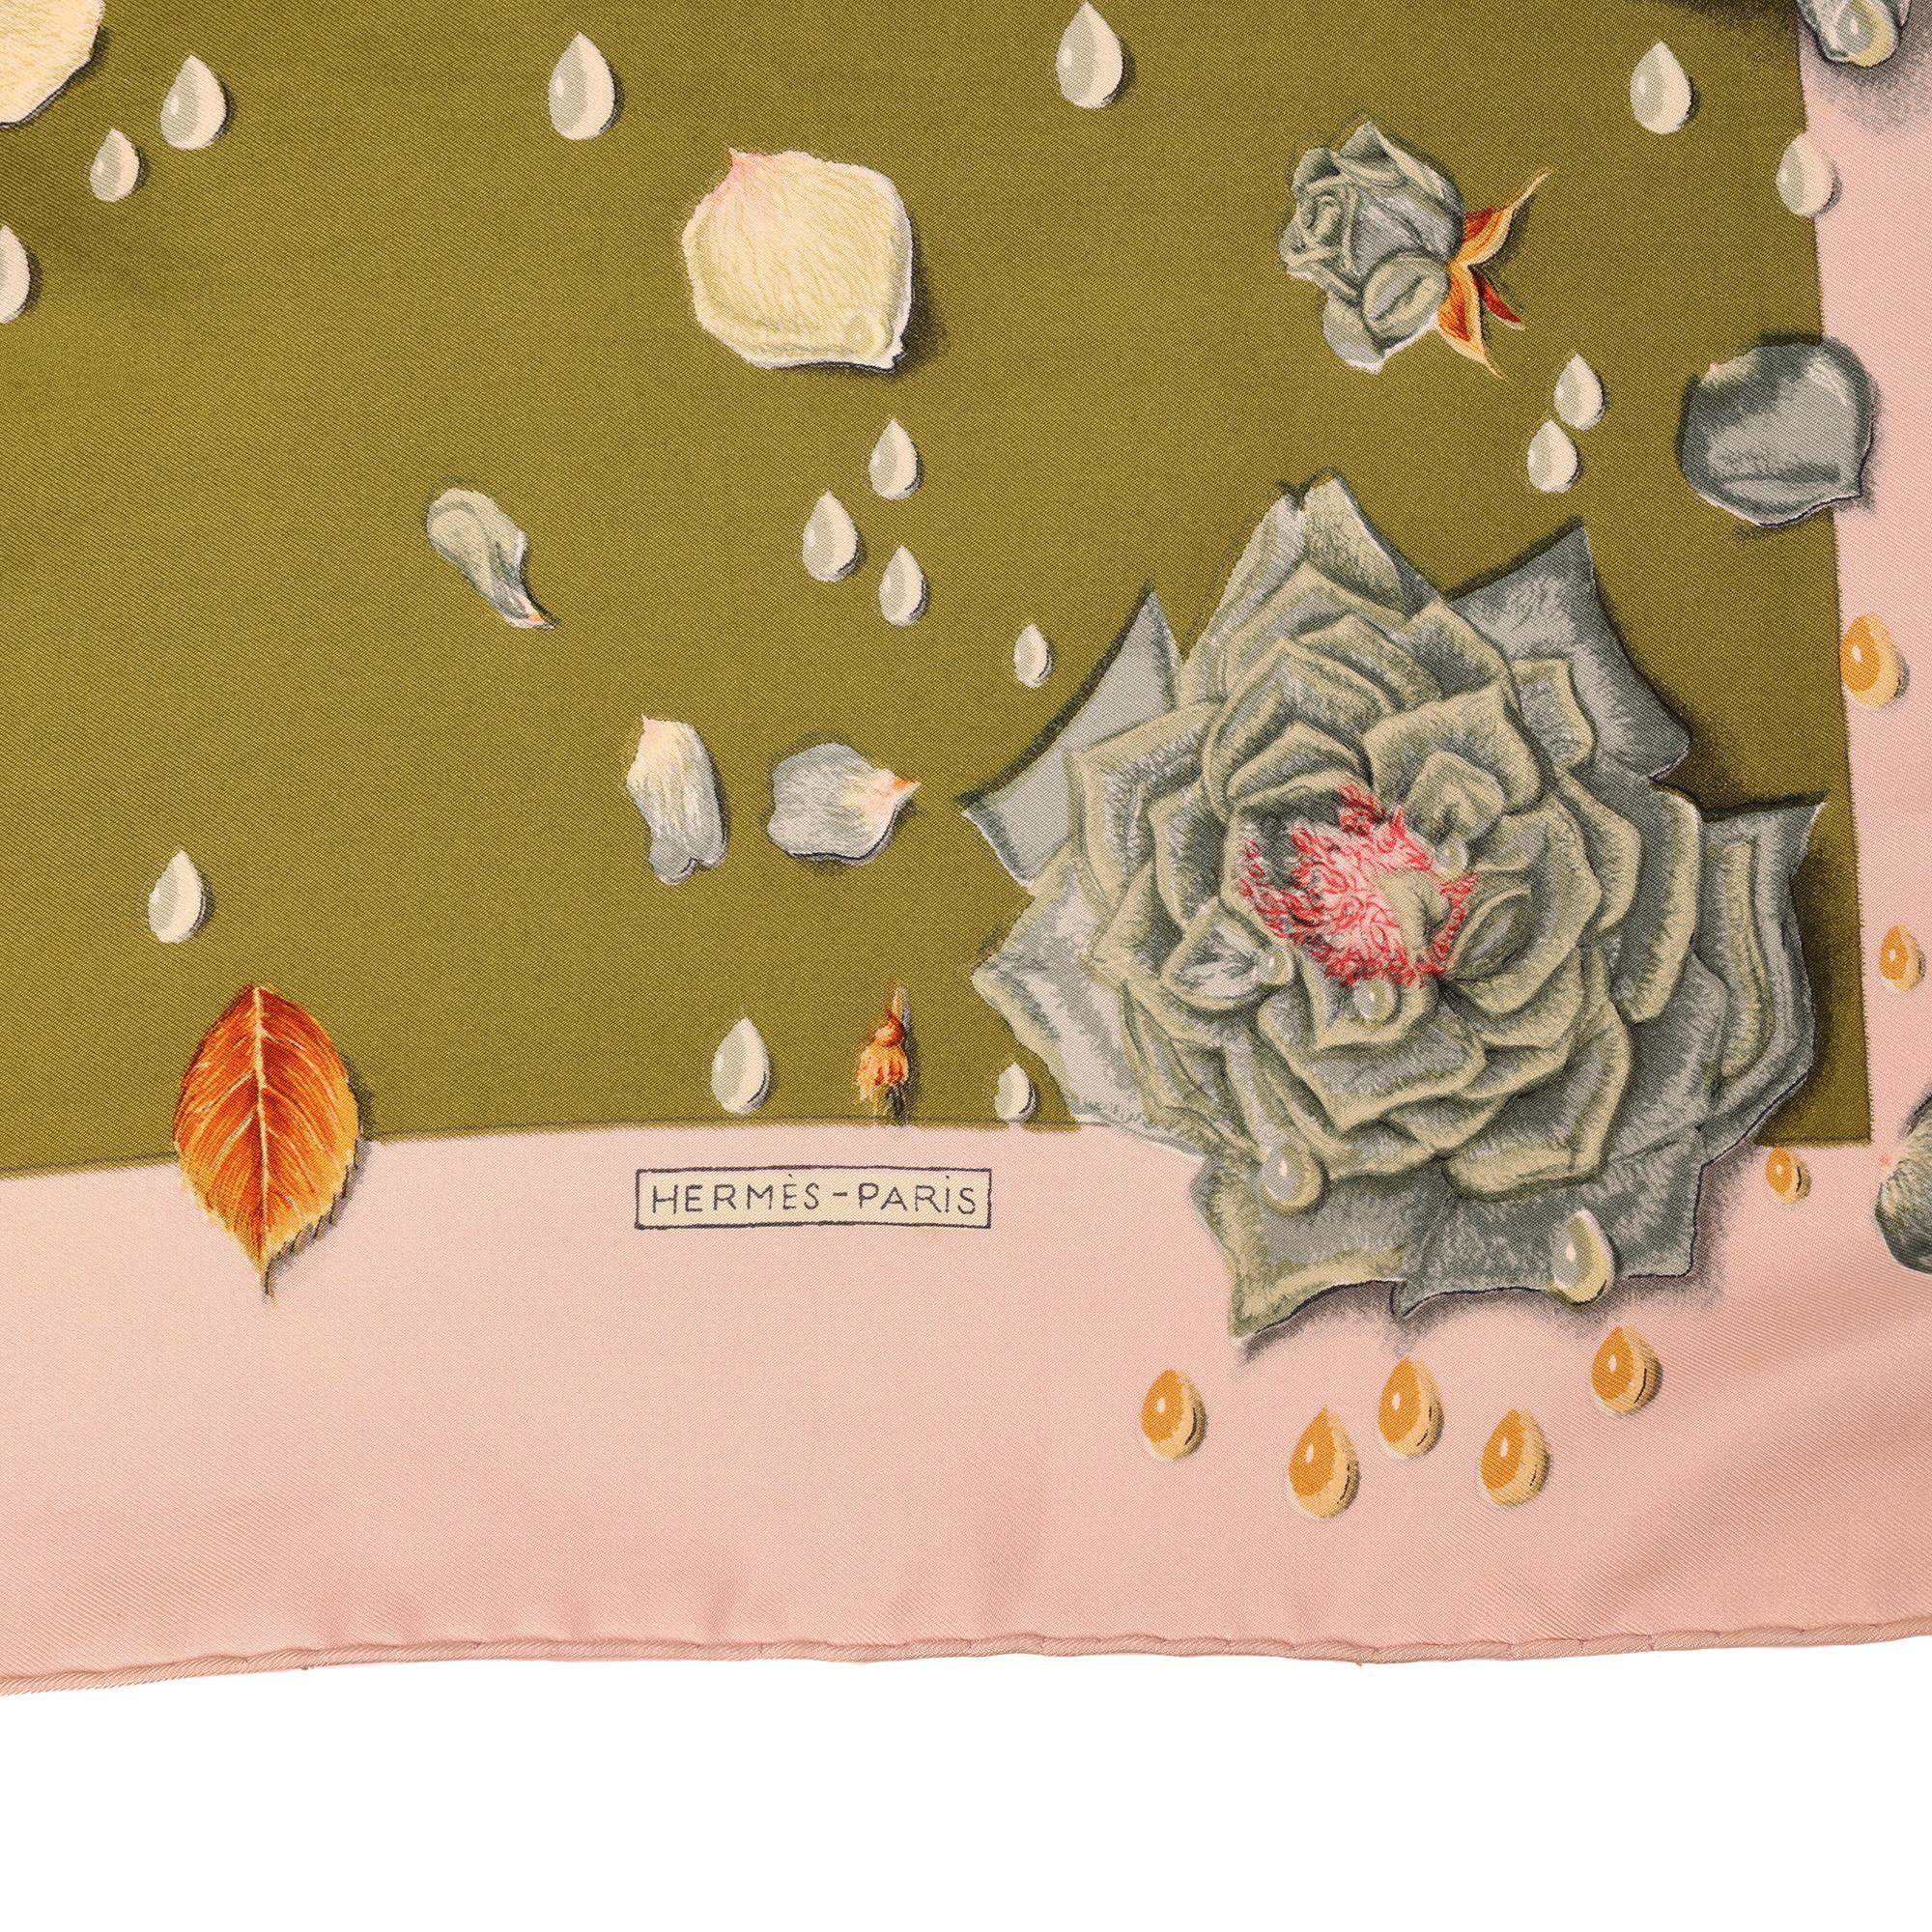 Hermès ROSE DAGREE & PELOUSE SILK VINTAGE LA ROSEE SCARF

CONDITION NOTES
The exterior is in very good condition with light signs of use.
Overall this item is in very good pre-owned condition. Please note the majority of the items we sell are